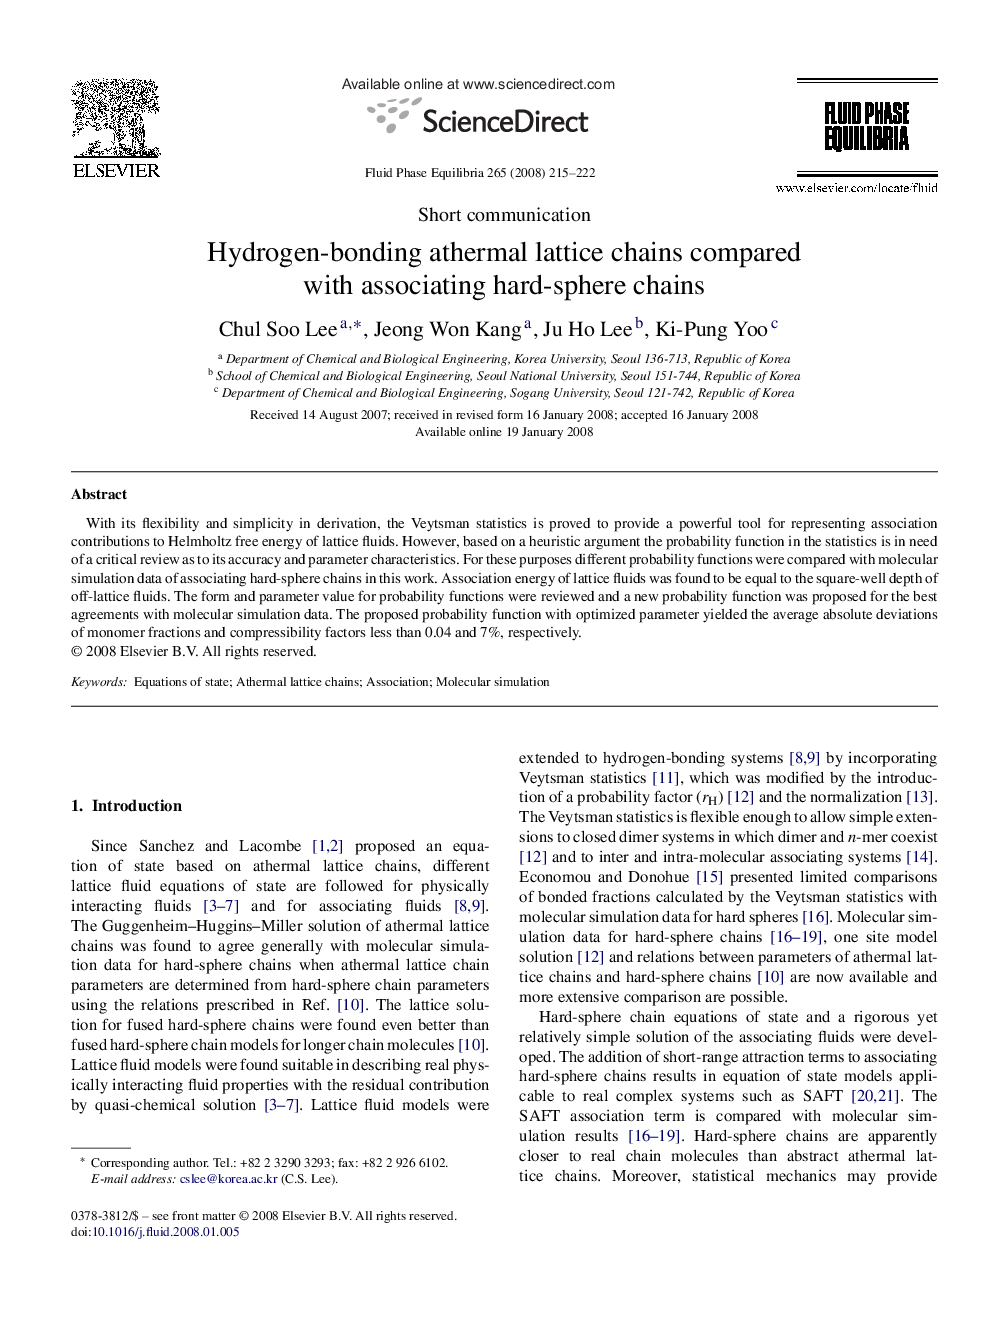 Hydrogen-bonding athermal lattice chains compared with associating hard-sphere chains